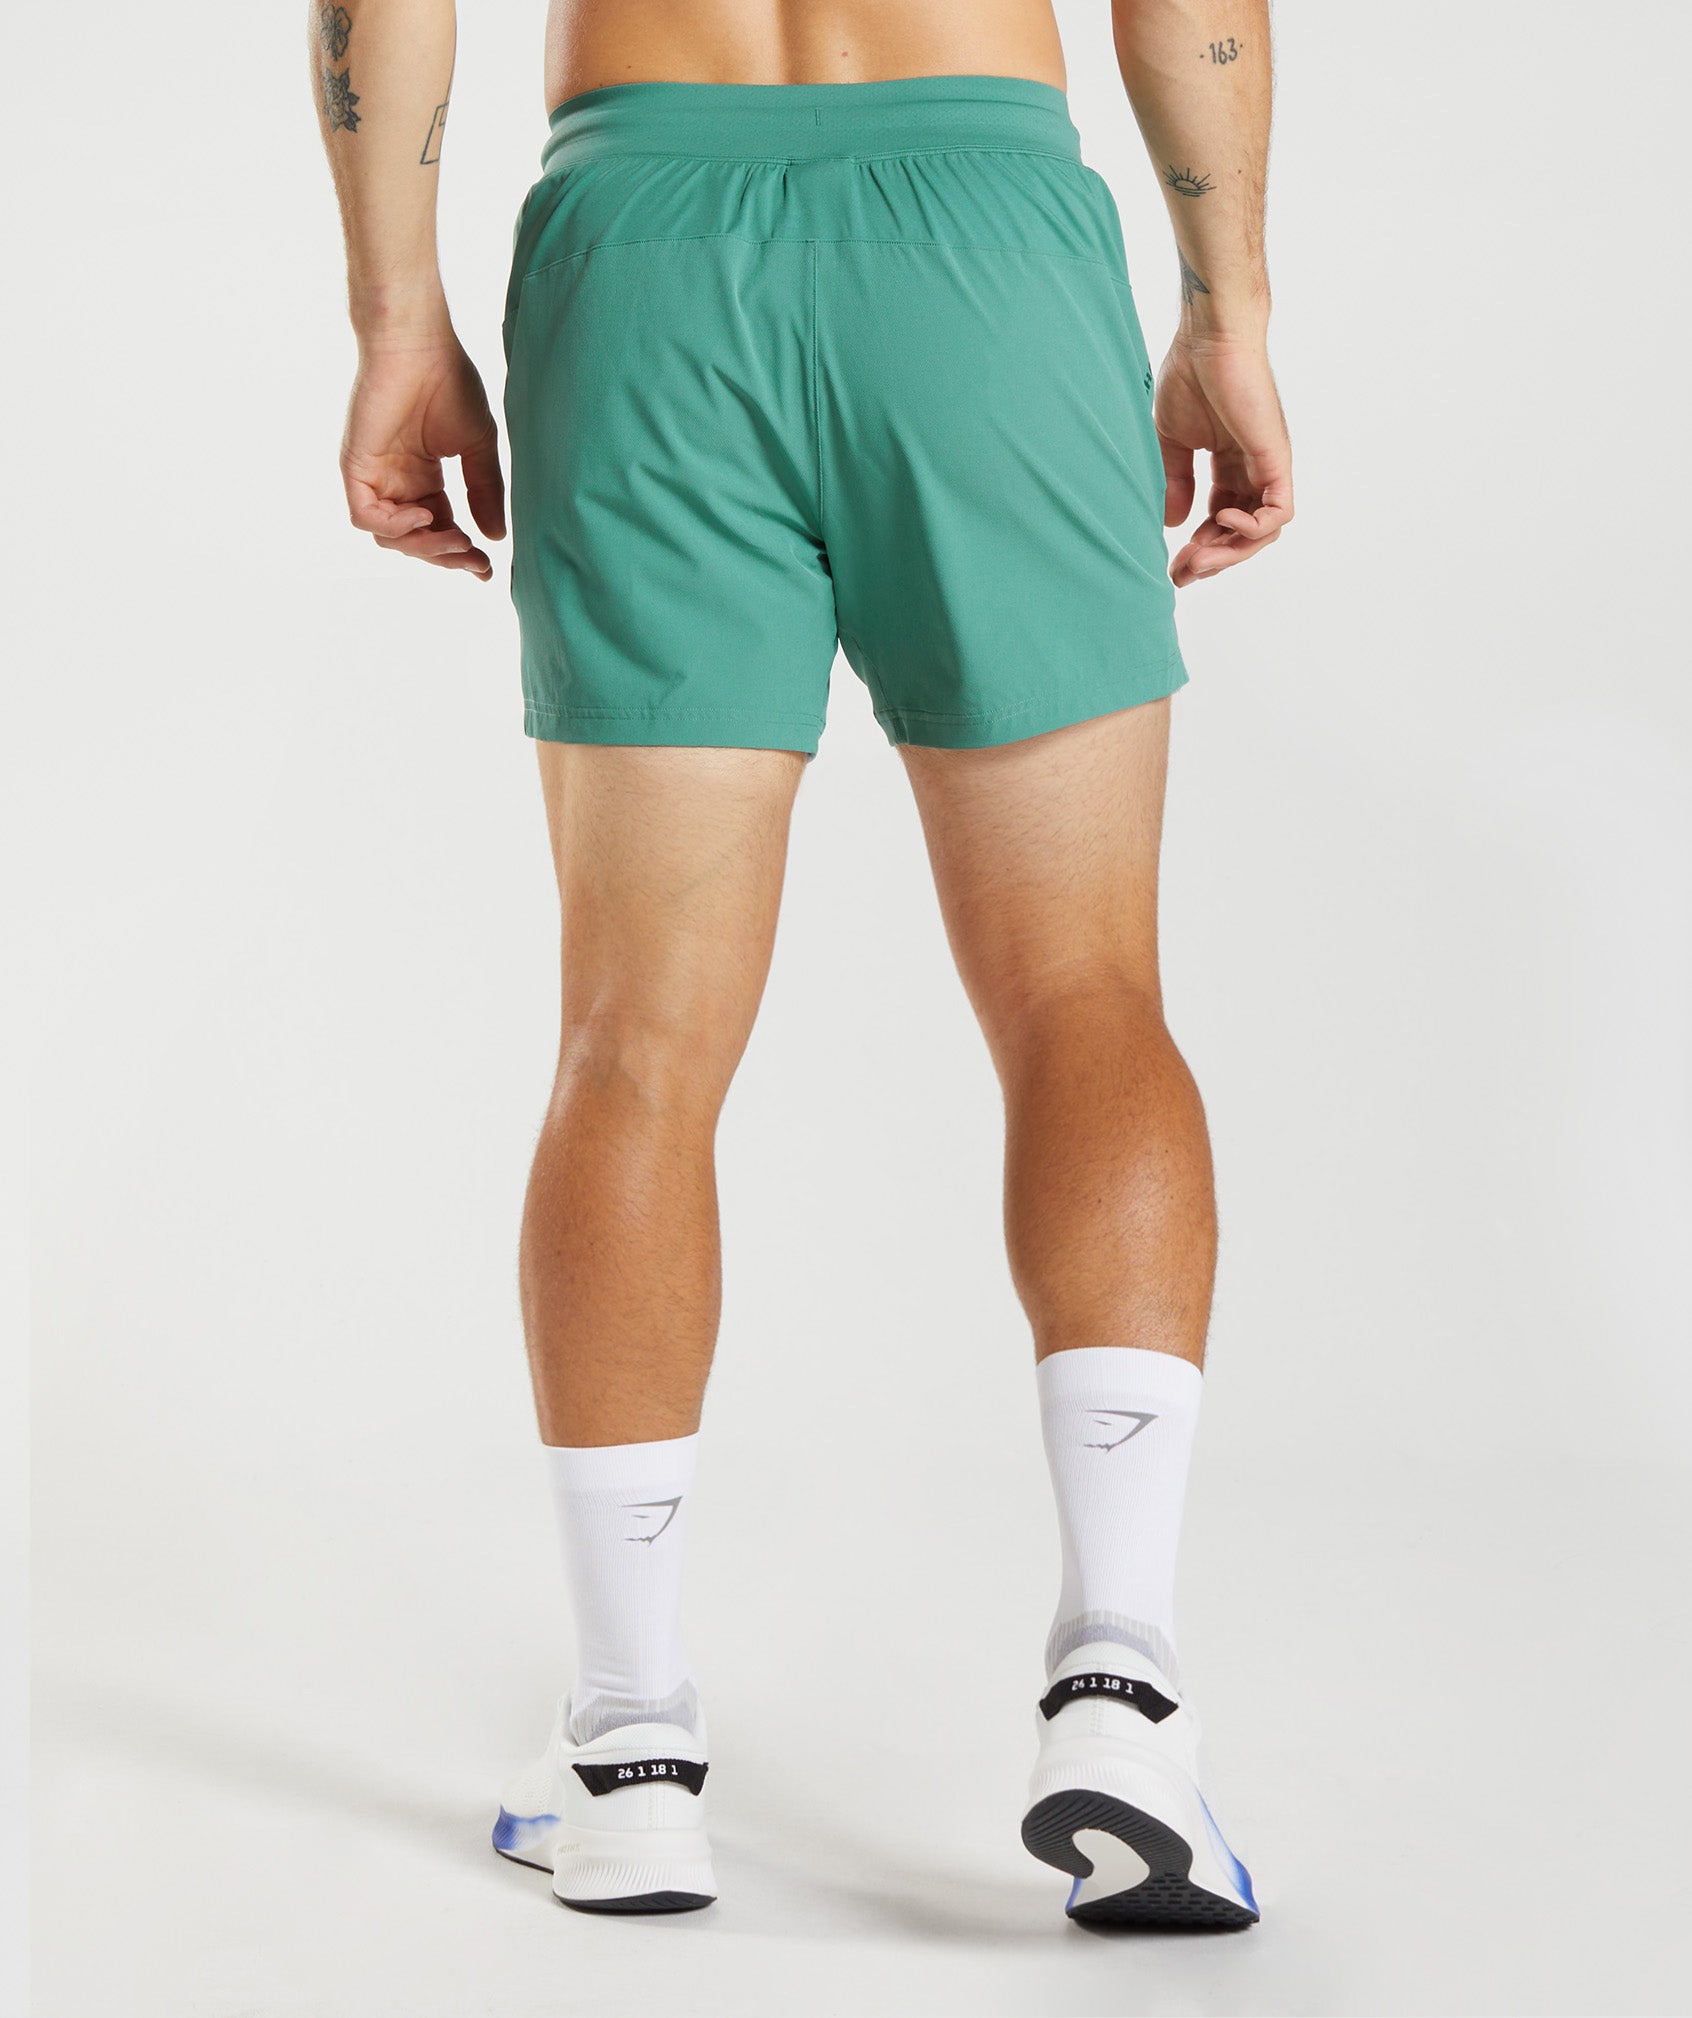 Apex 5" Perform Shorts in Hoya Green - view 2